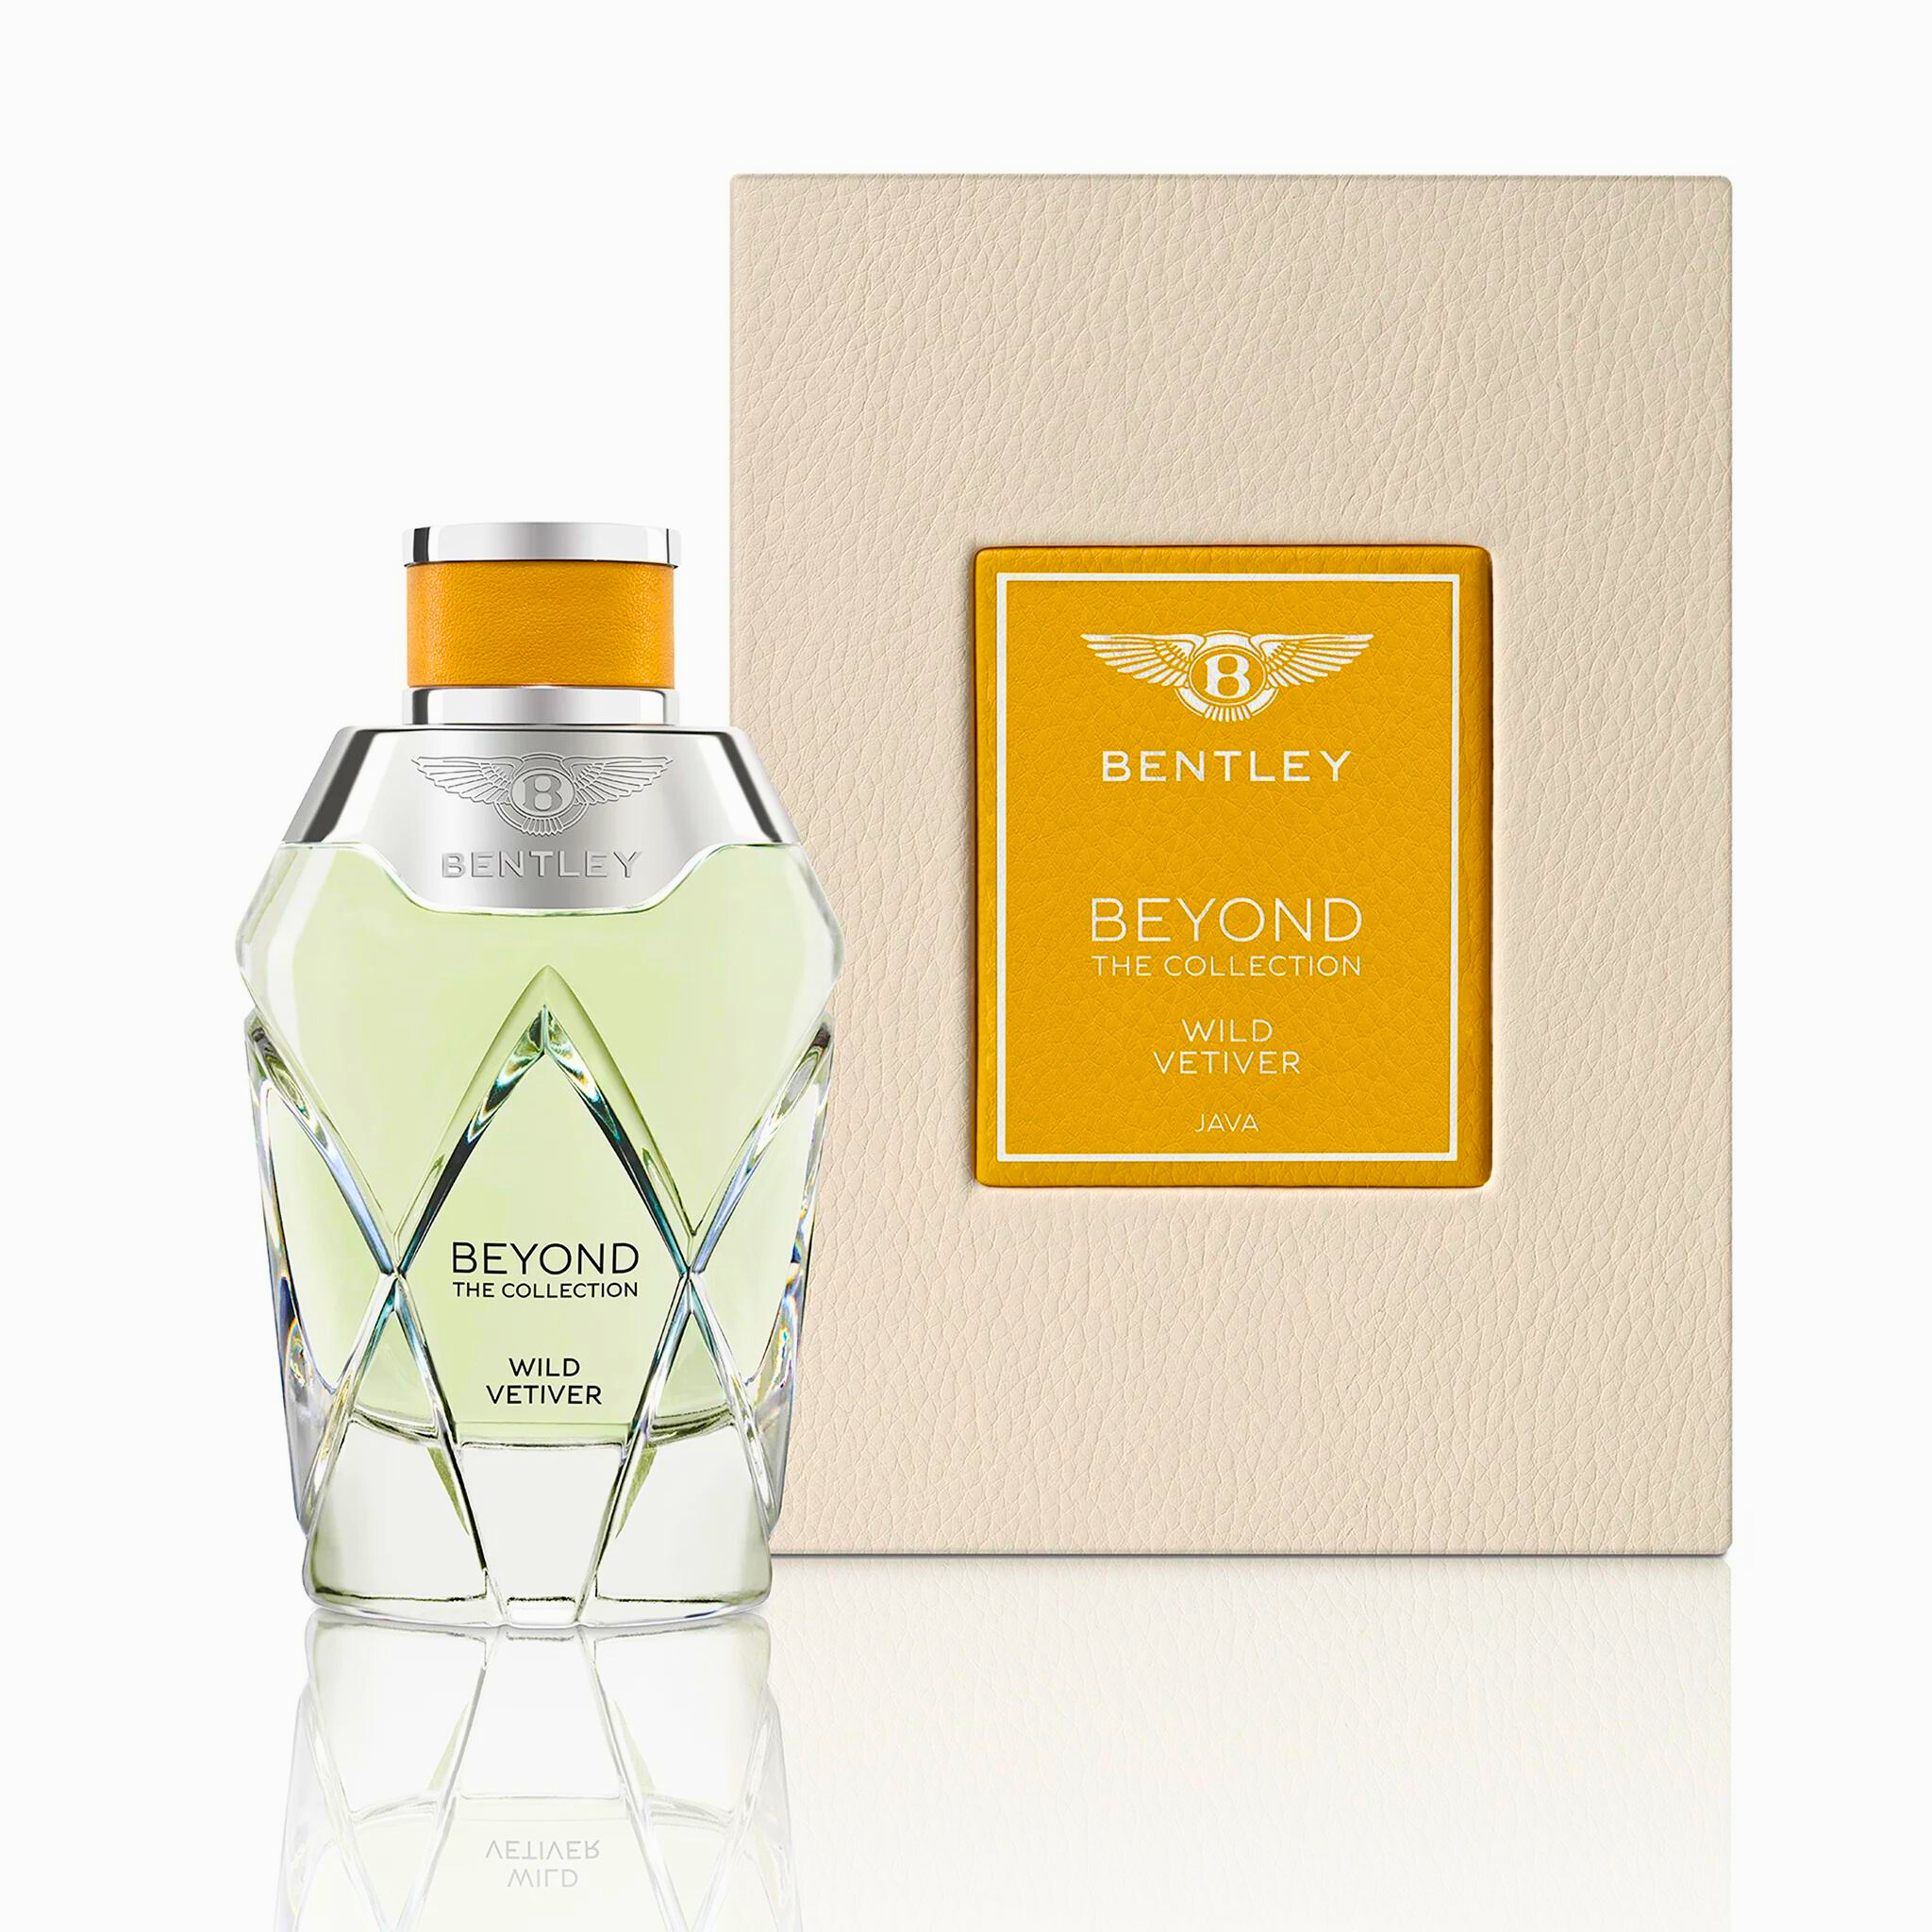 Bentley Beyond the Collection Wild Vetiver EDP Unisex